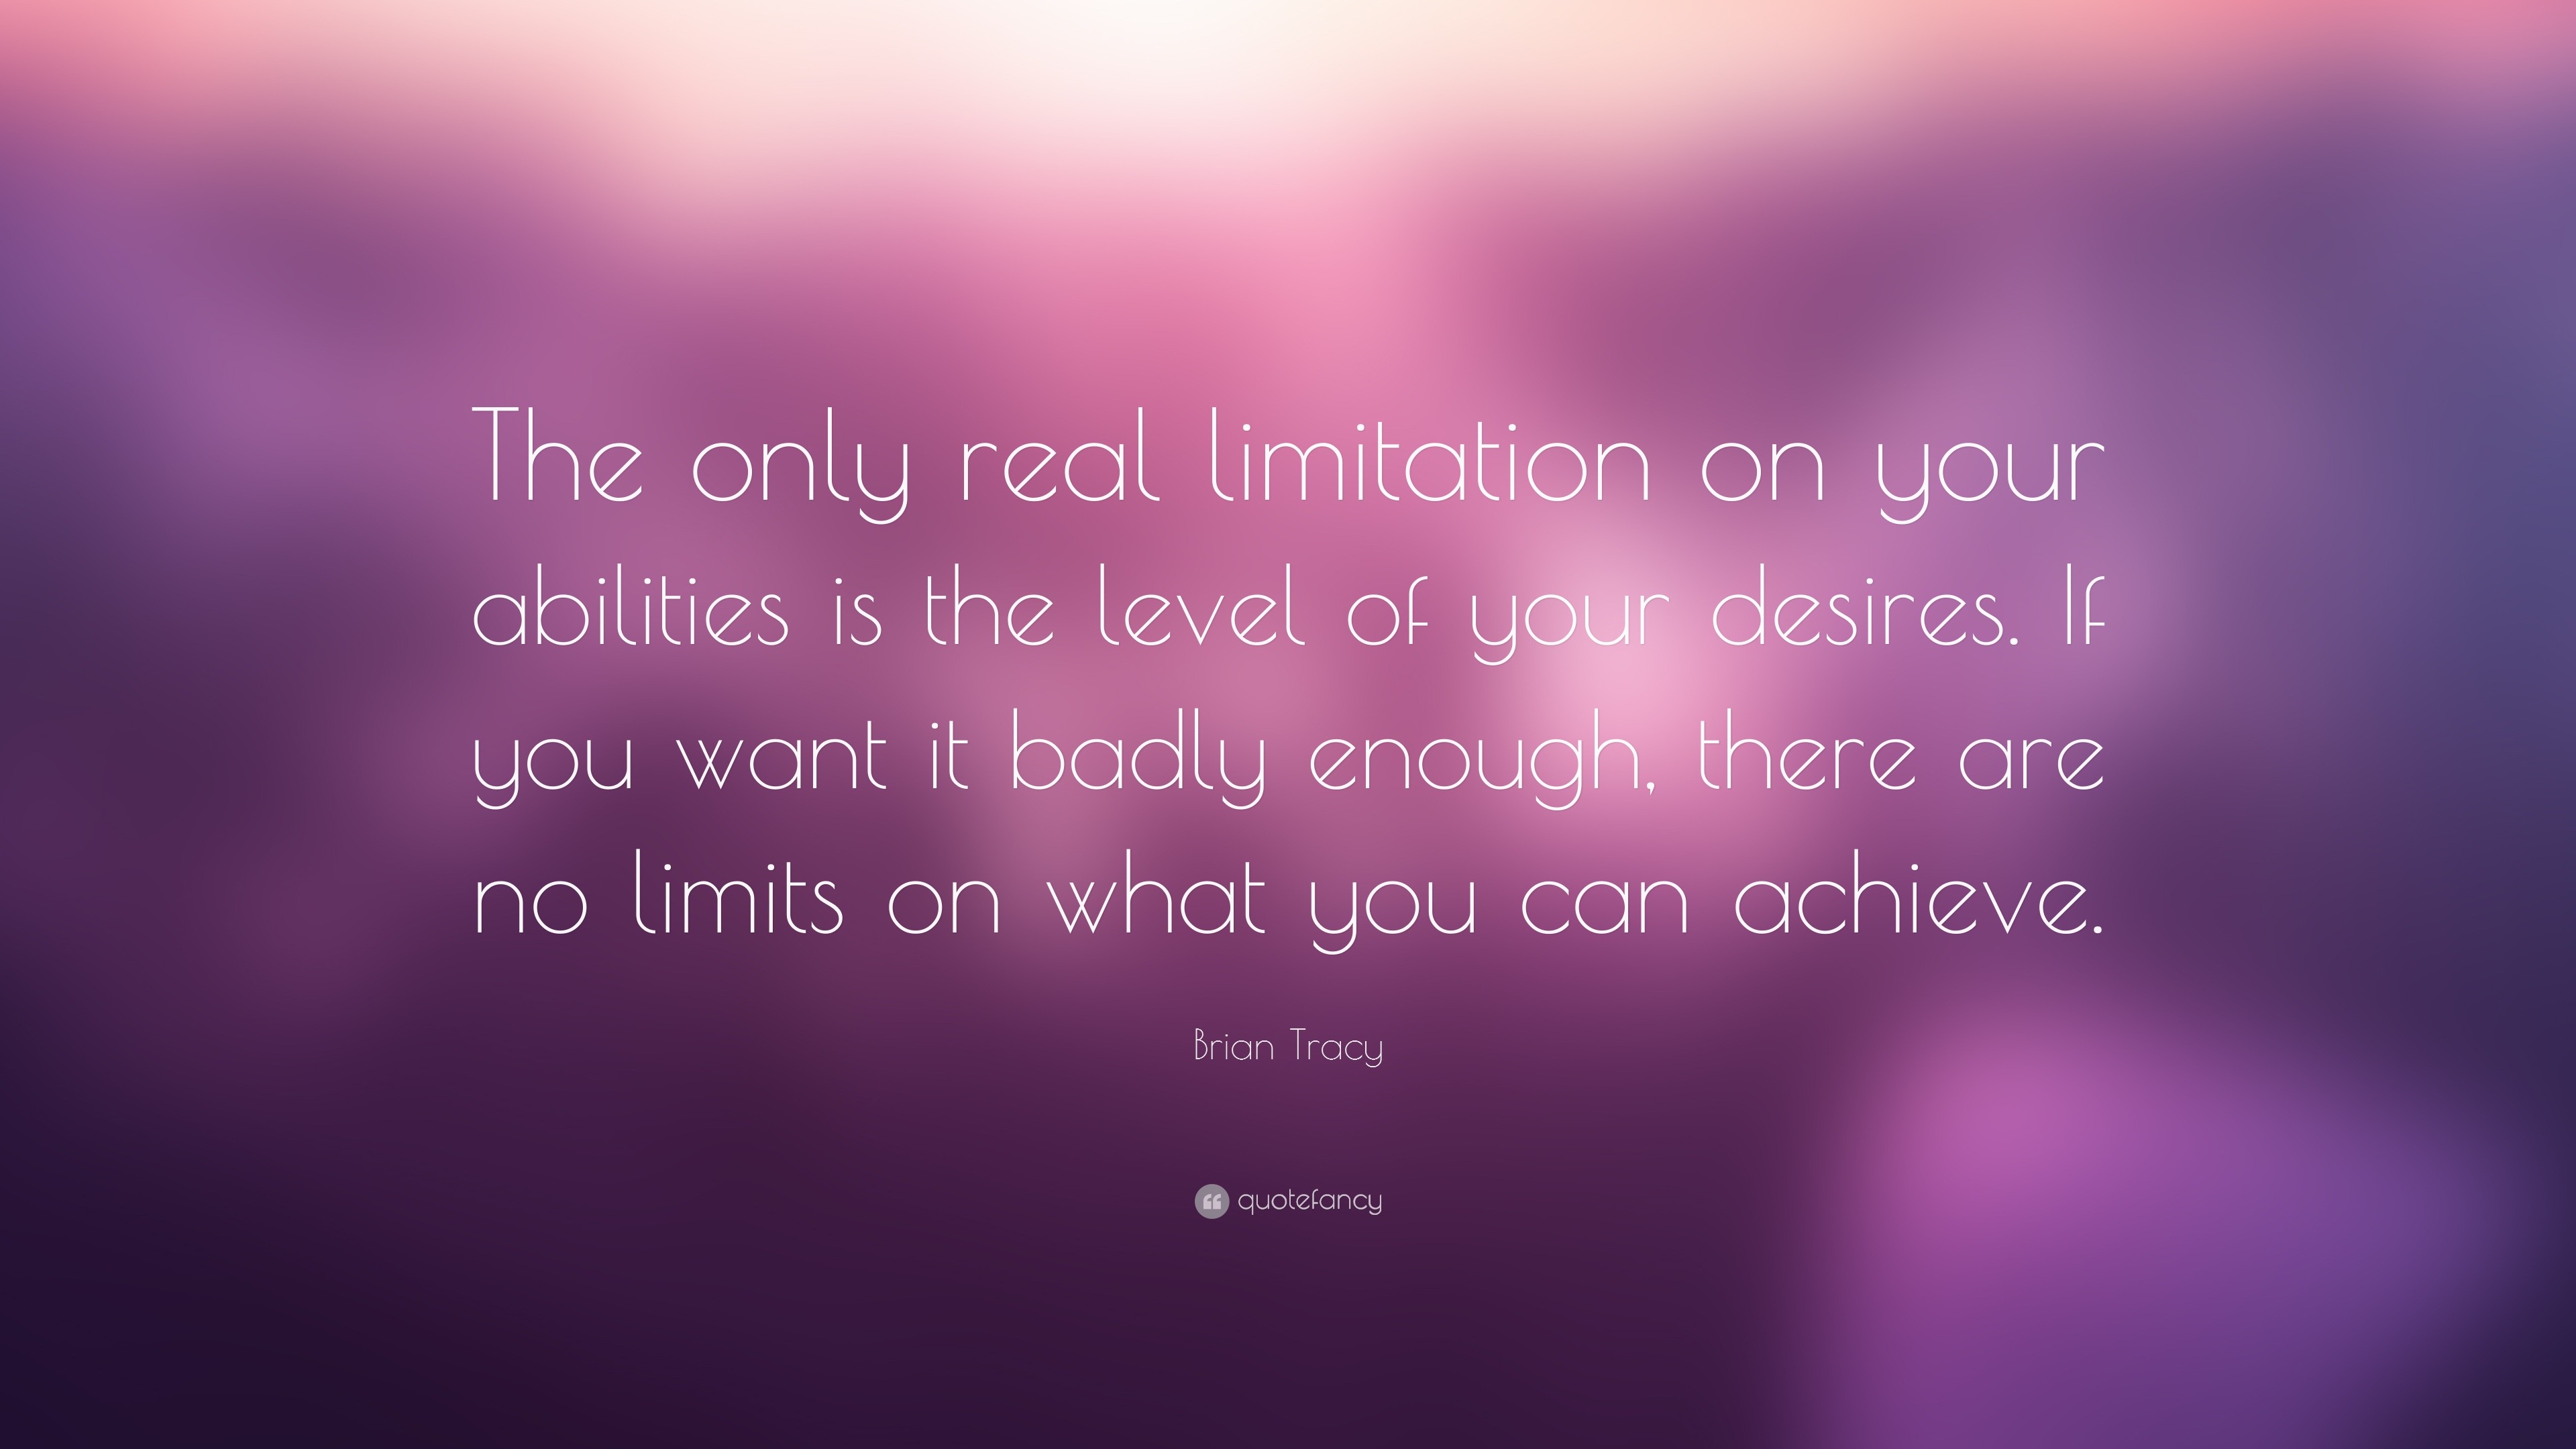 Brian Tracy Quote: “The only real limitation on your abilities is the ...